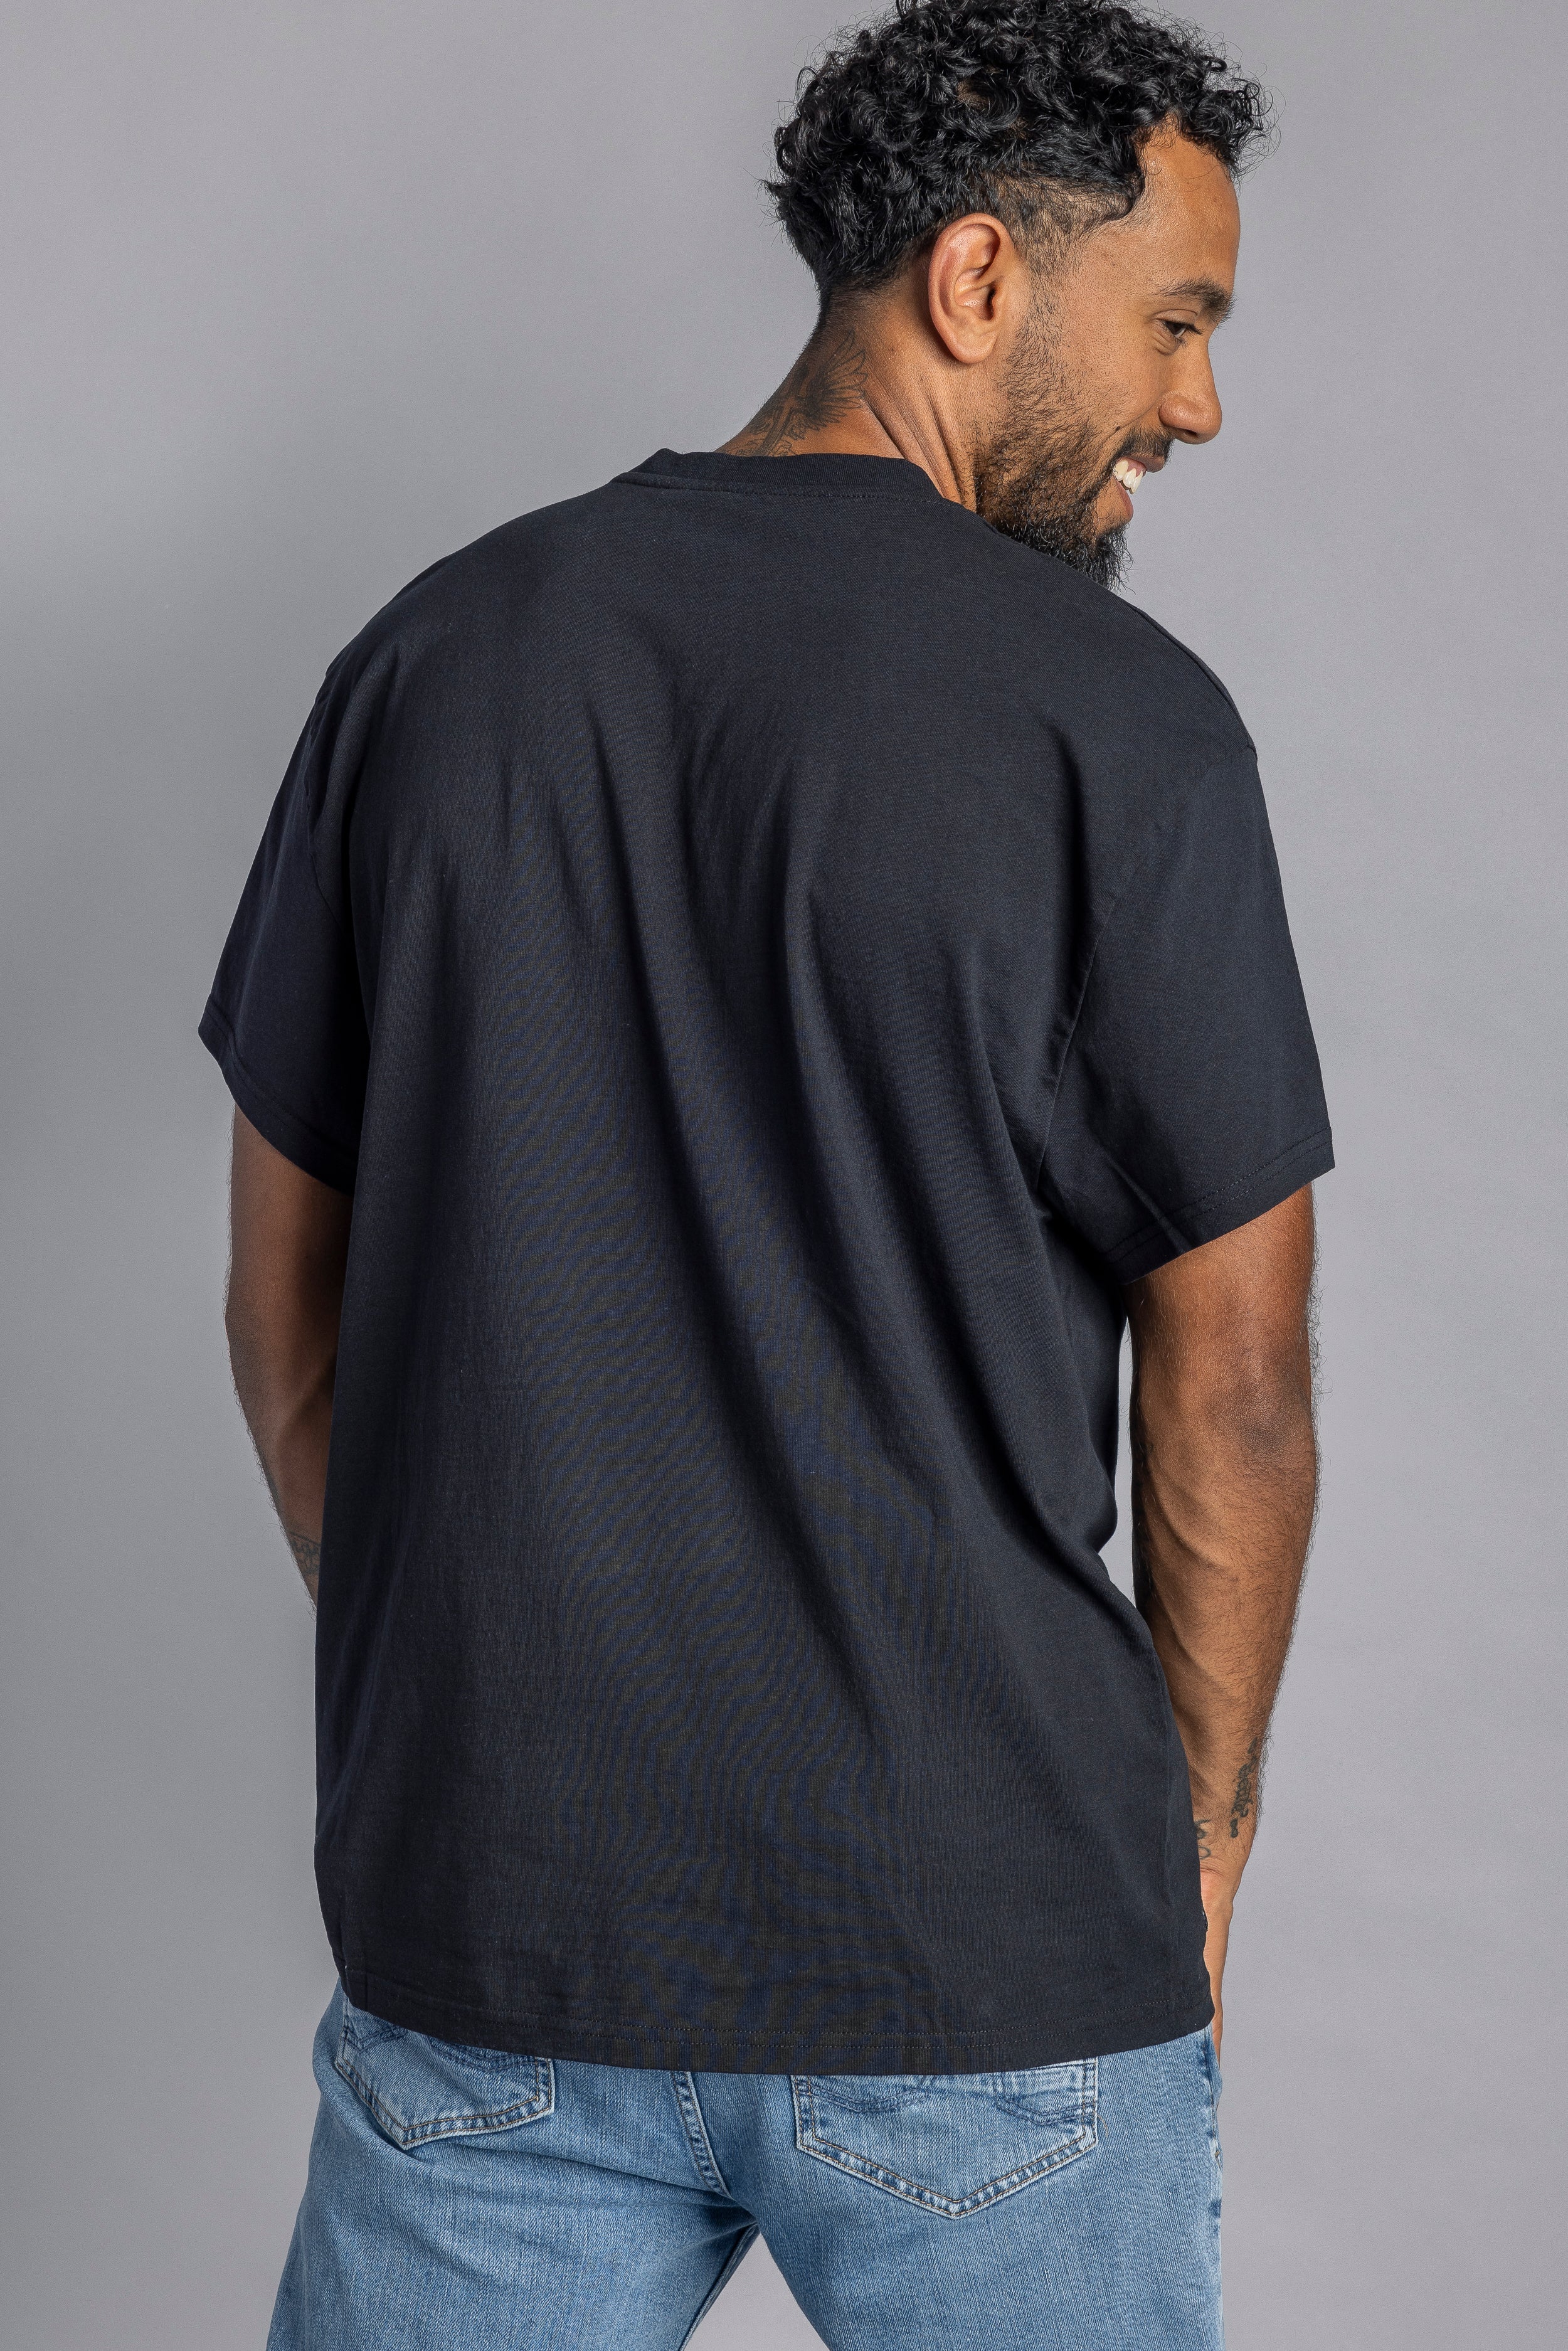 Black oversized T-shirt made from recycled wool from DIRTS